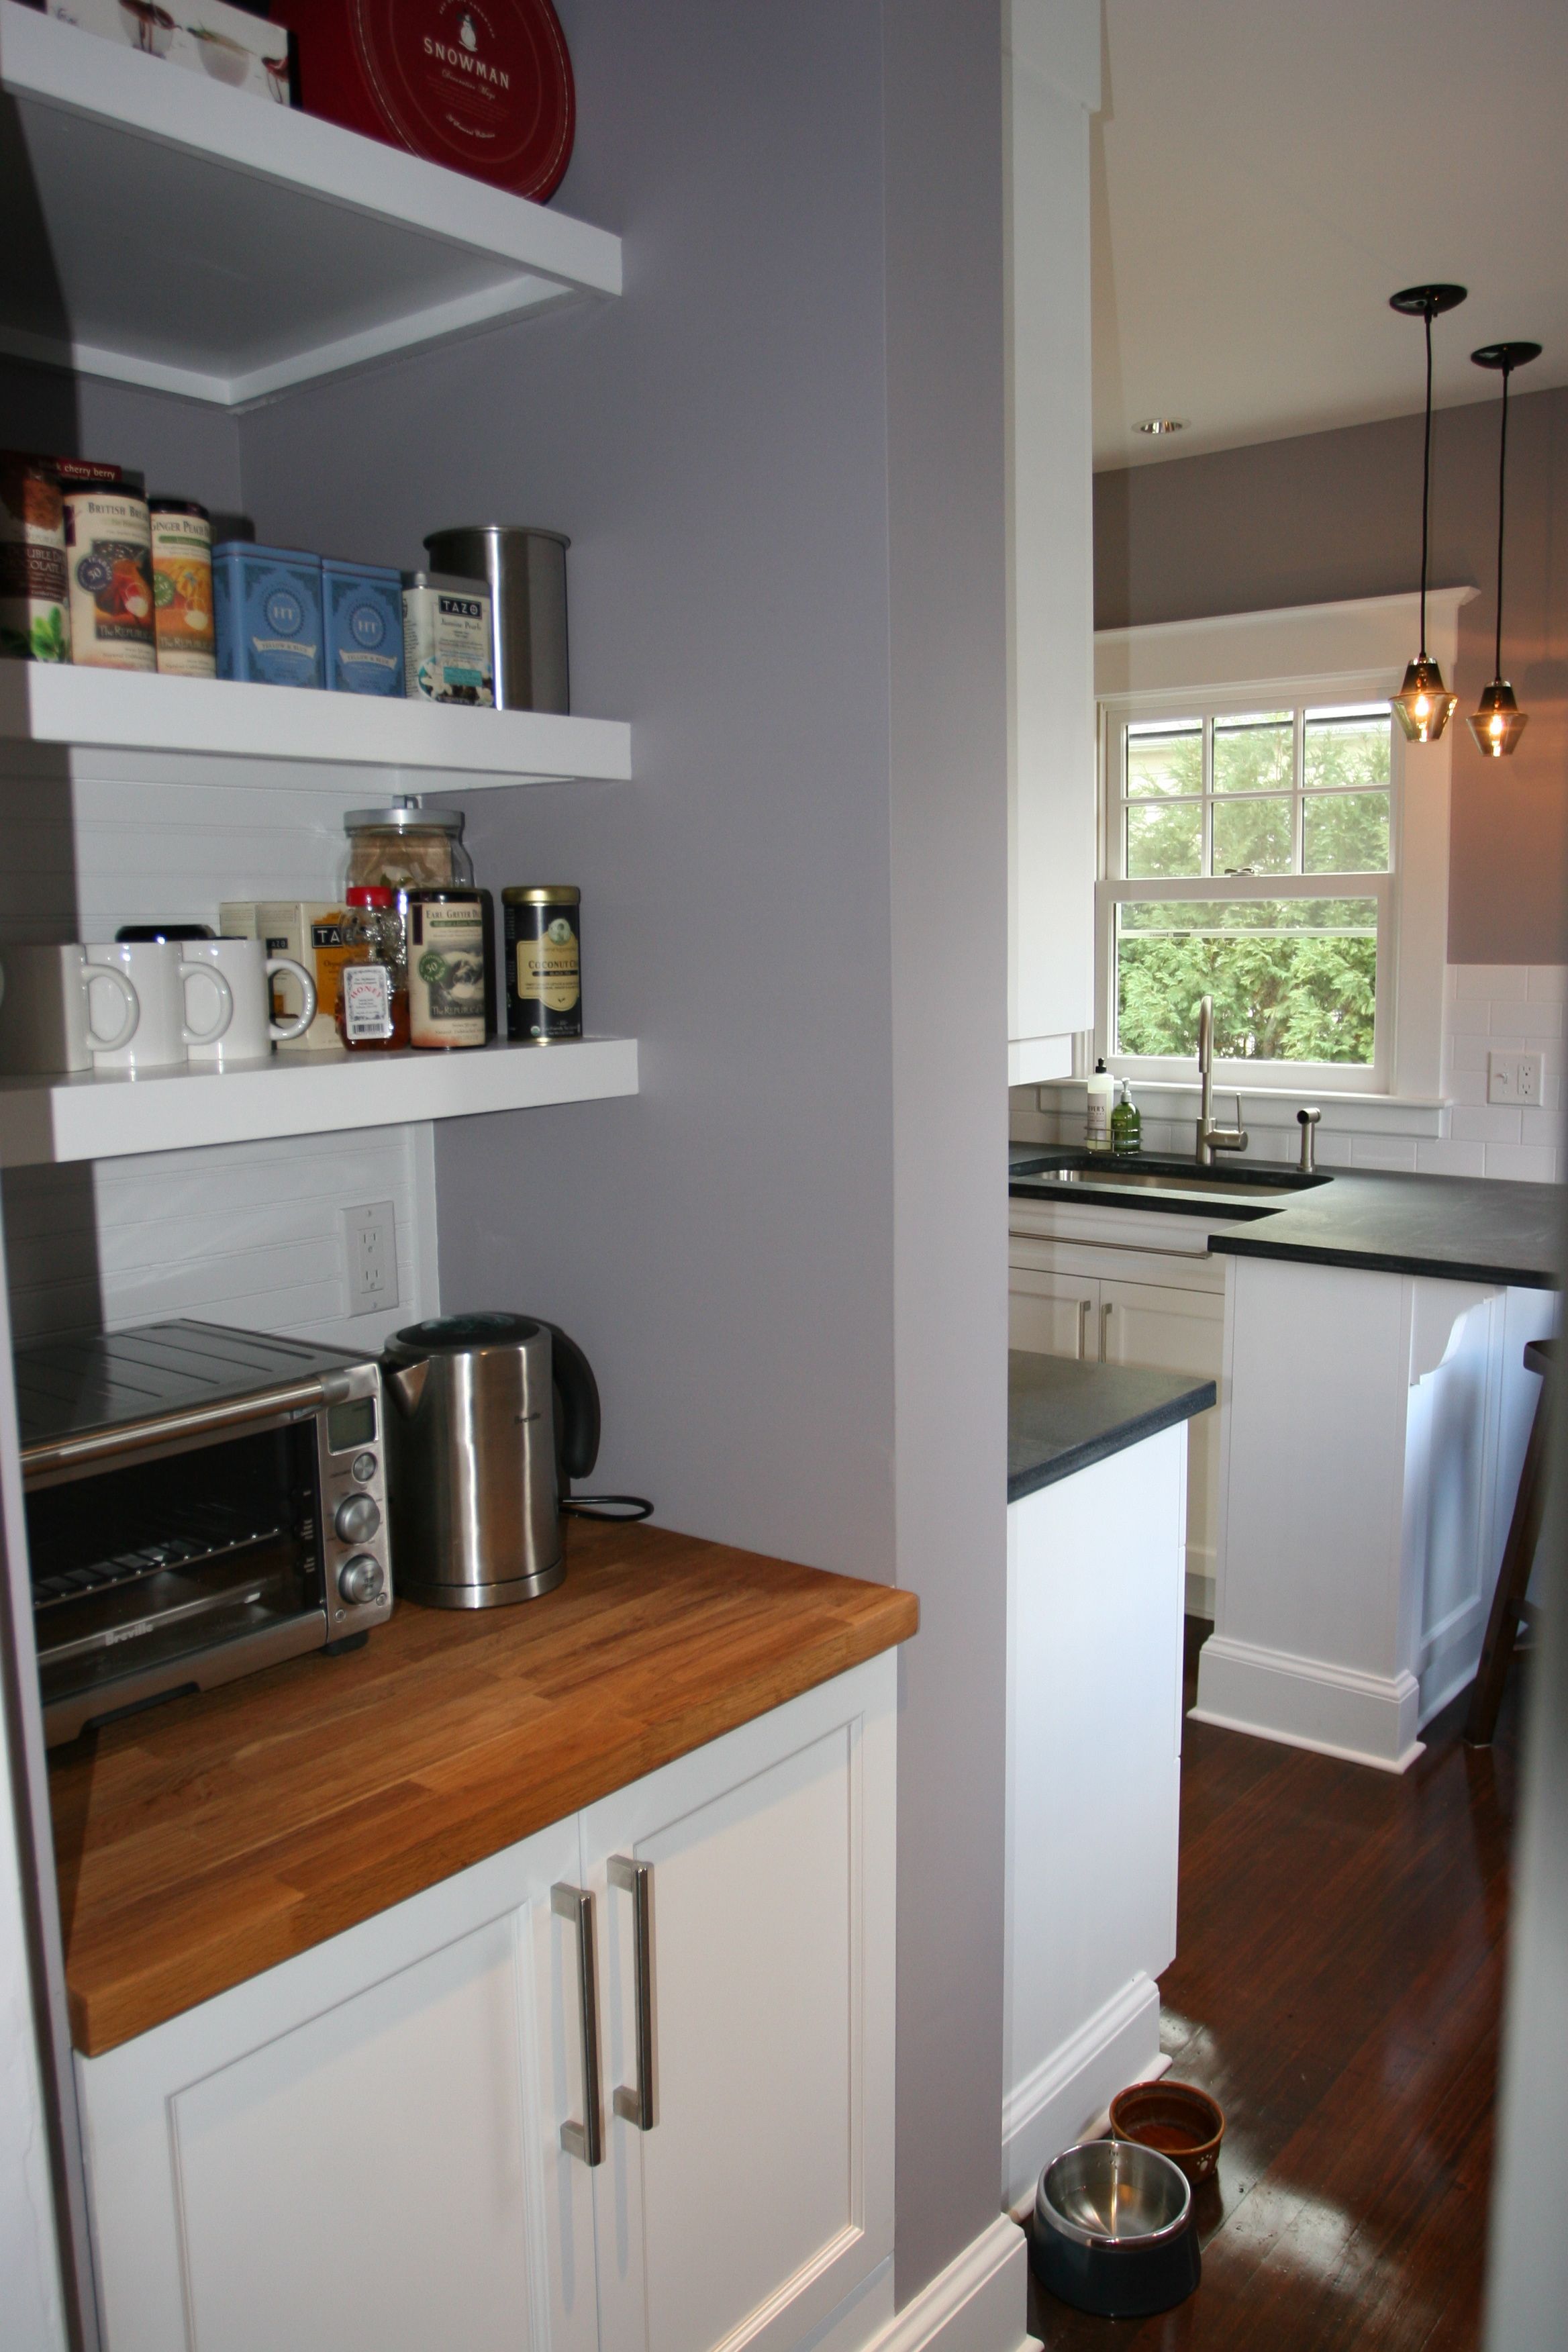 The tea n' toast pantry looks like it's always been there, alongside the stunning kitchen.